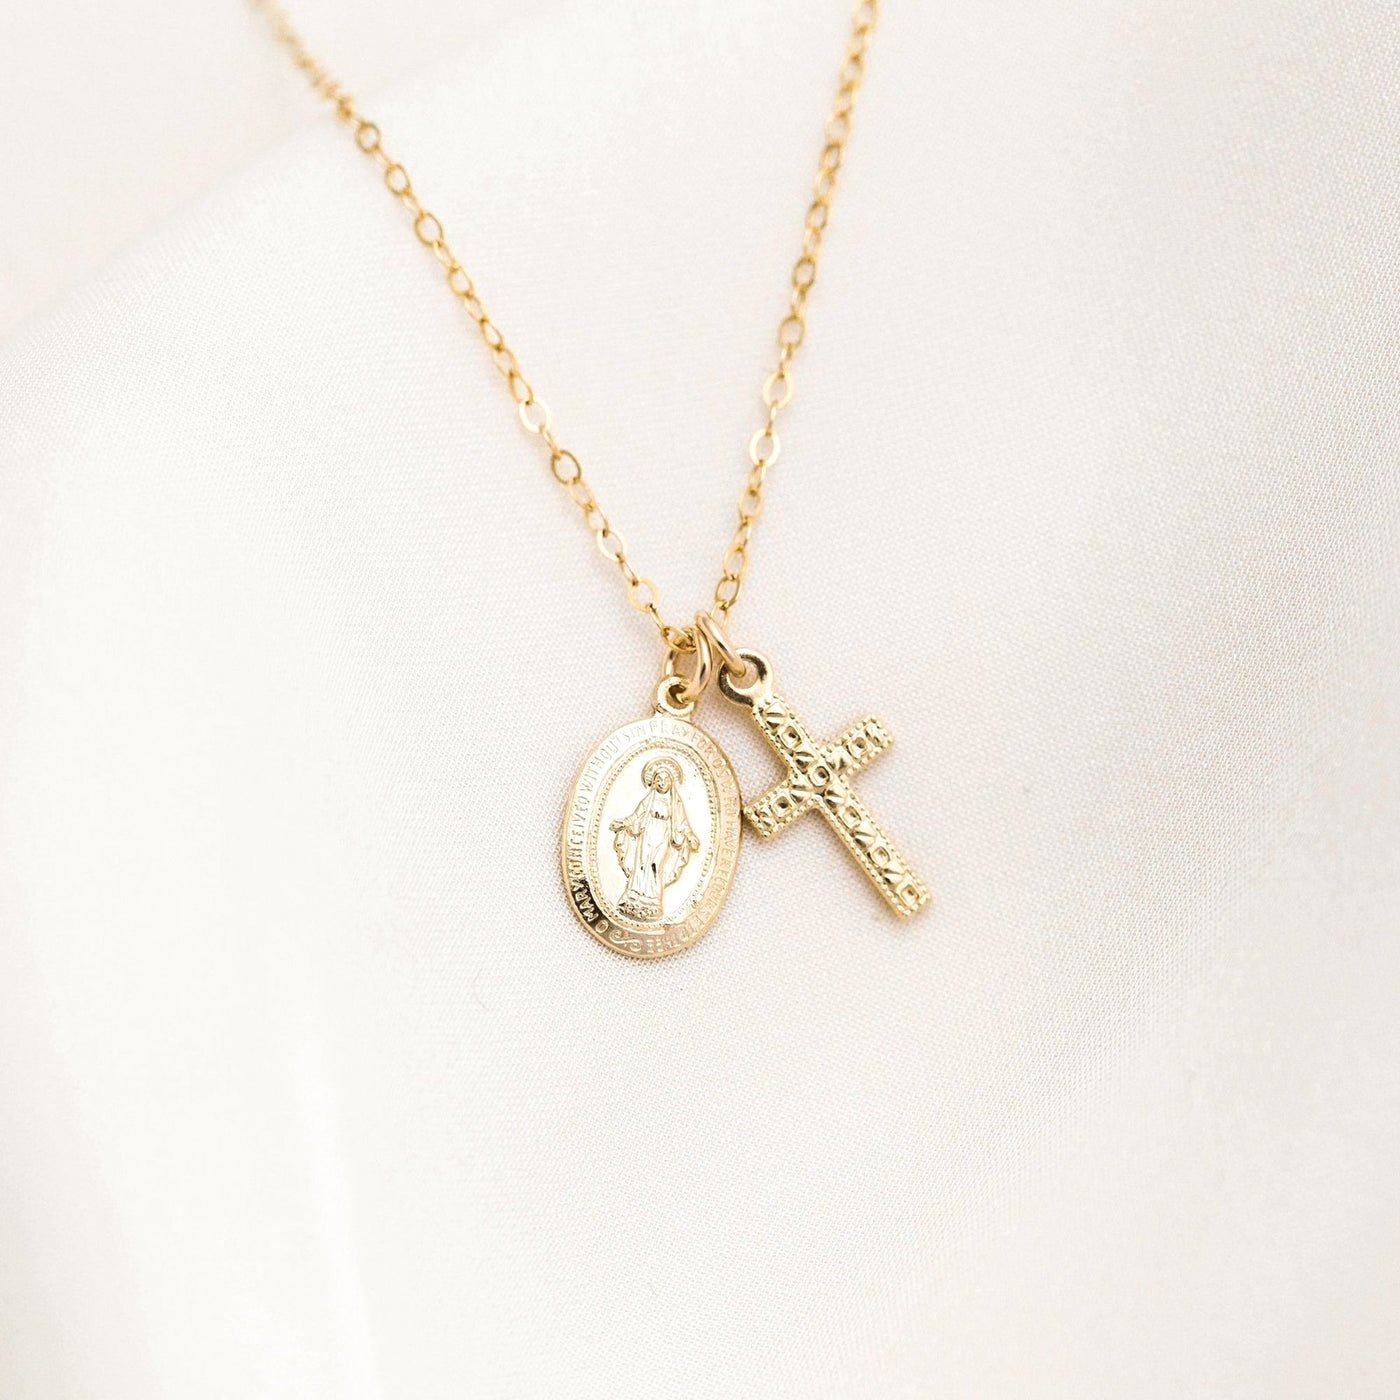 Gold Tiny Virgin Mary Necklace, Cross Necklace,mother Mary Necklace,catholic  Necklace,religious Jewelry, Bridesmaid Gift,mothers Day Gift - Etsy